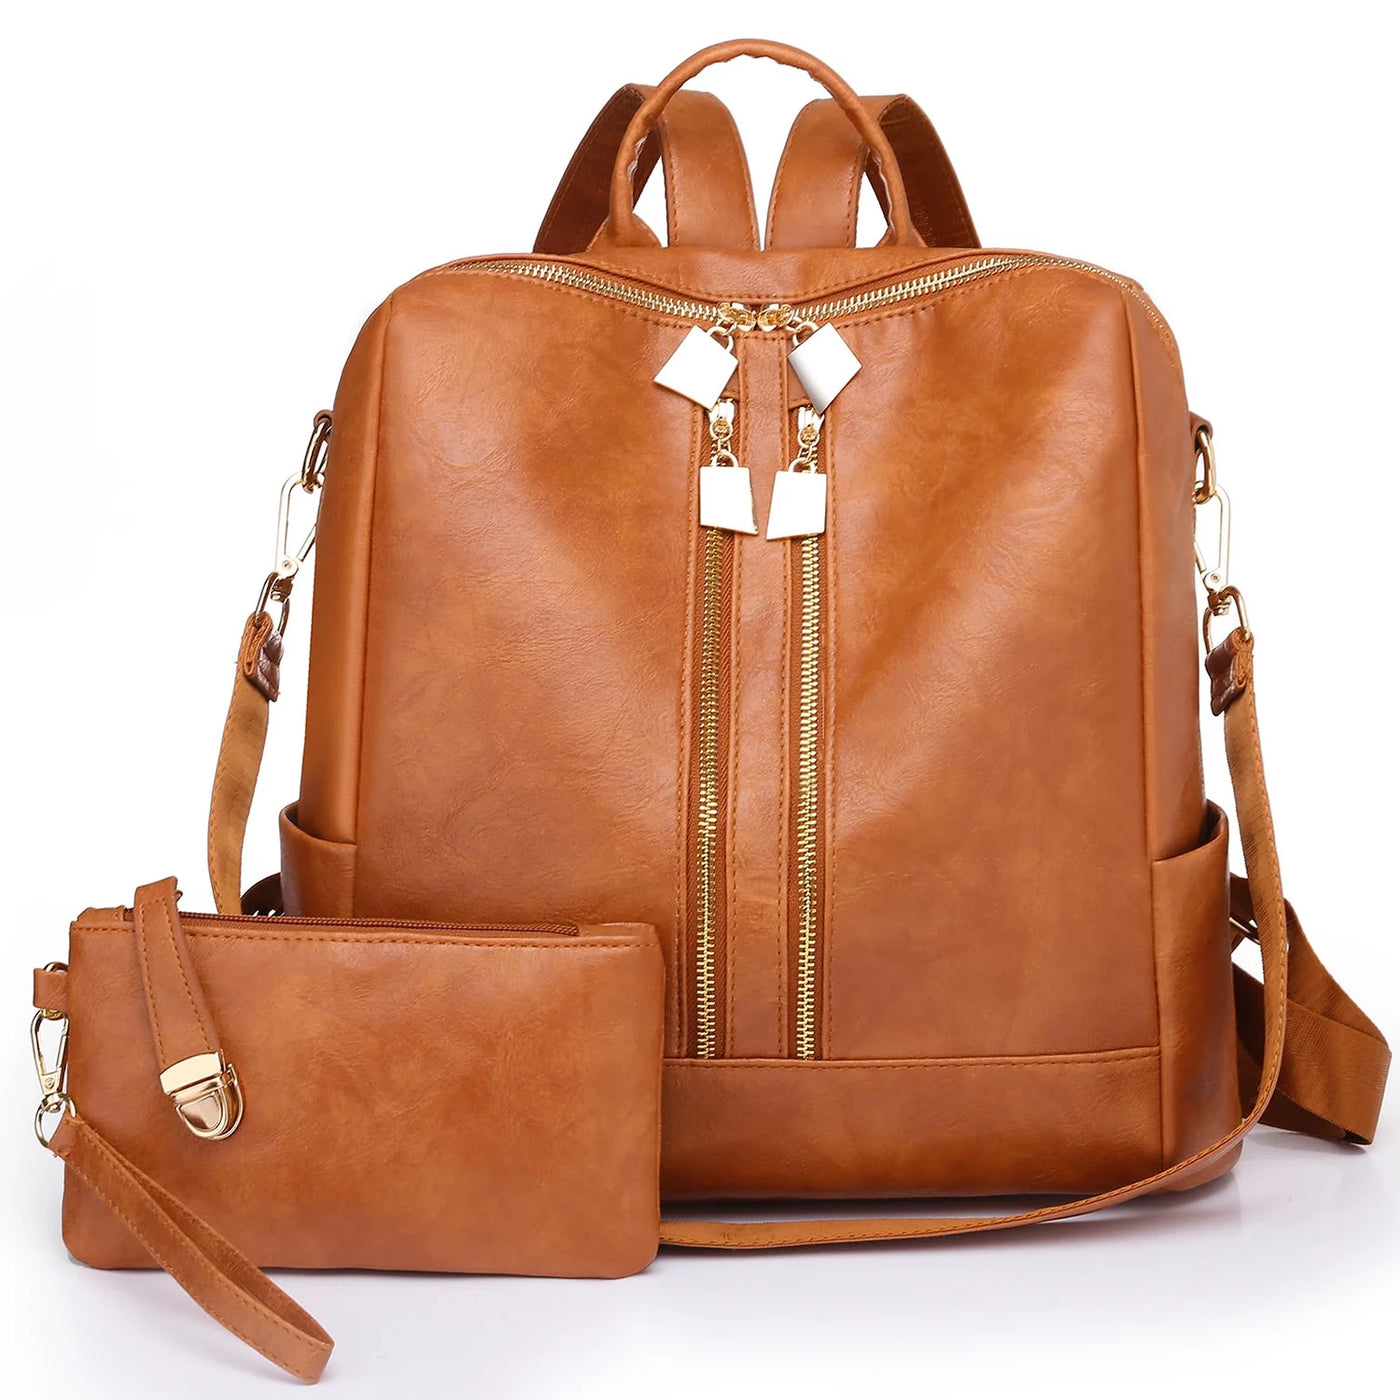 Women's Backpack Purse Leather Travel Backpack